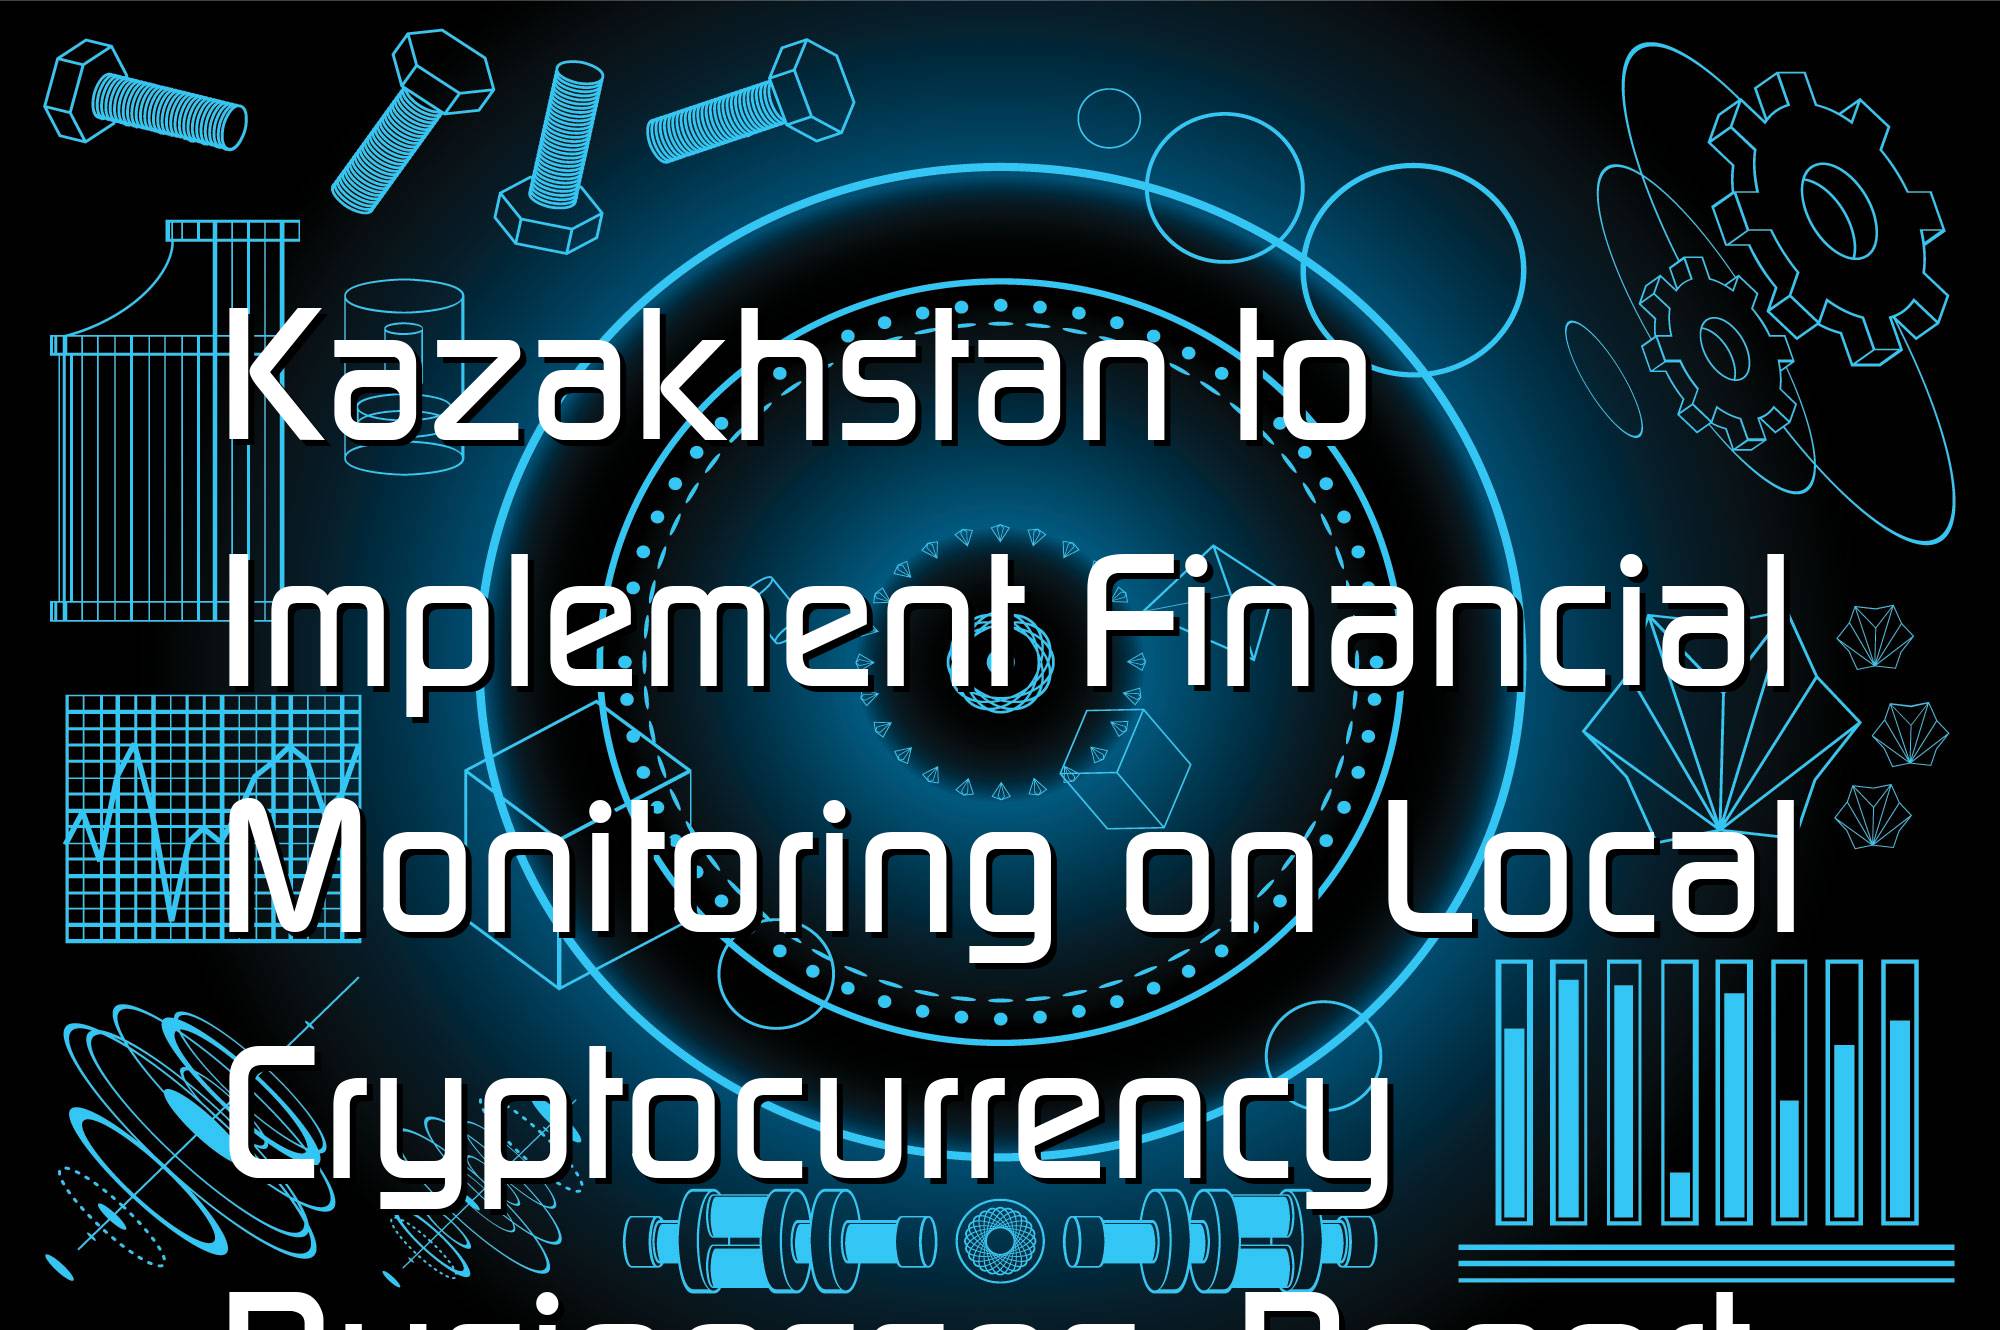 @$62437: Kazakhstan to Implement Financial Monitoring on Local Cryptocurrency Businesses: Report